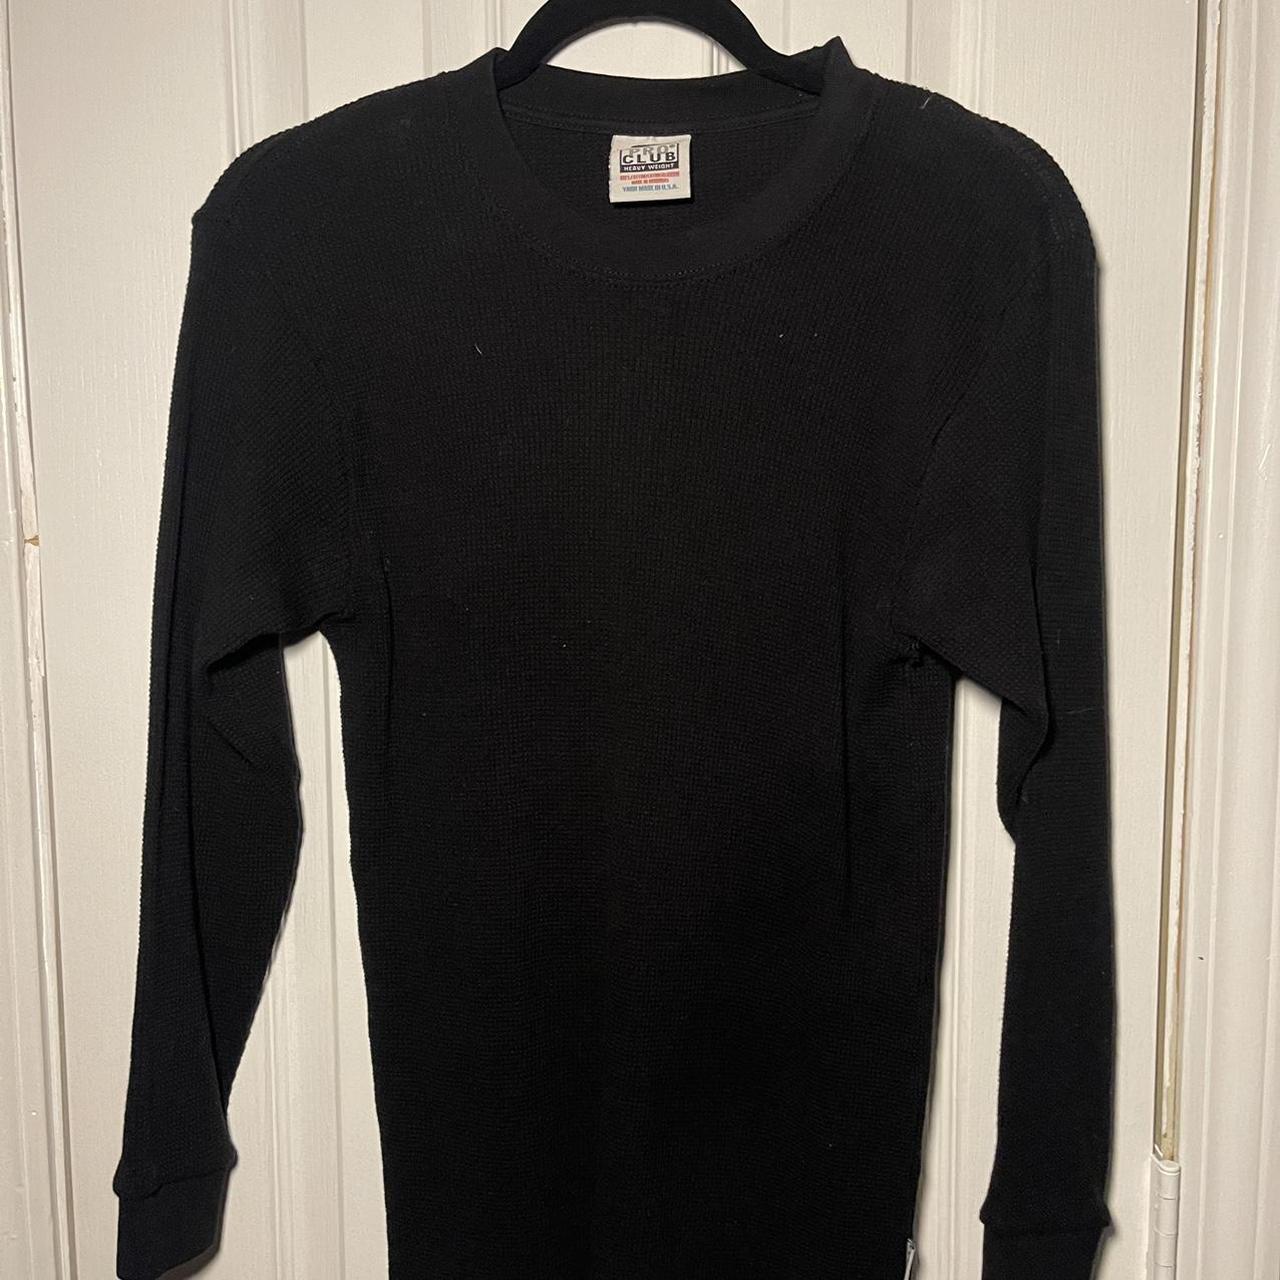 Black Pro Club Thermal Size M Thermal (Waffle)... - Depop